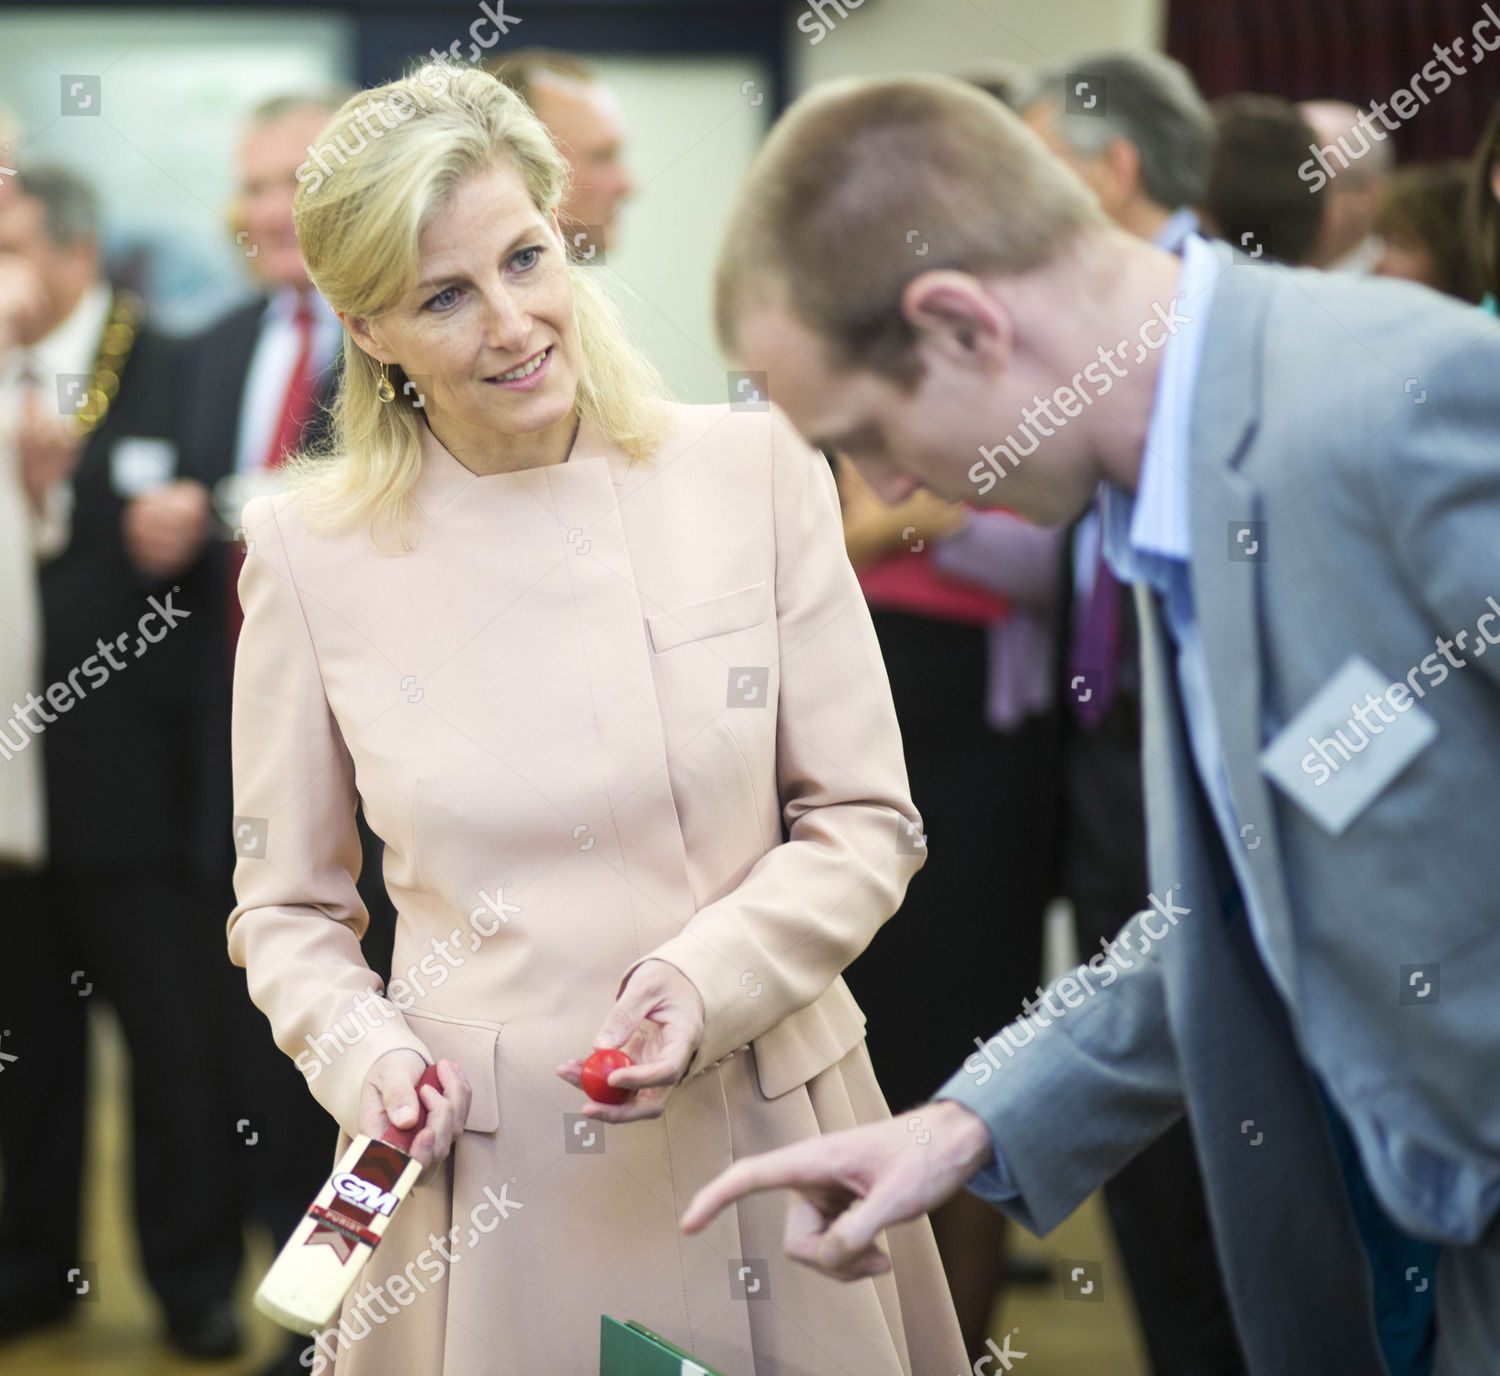 sophie-countess-of-wessex-visits-treloars-college-hampshire-britain-shutterstock-editorial-3787952c.jpg